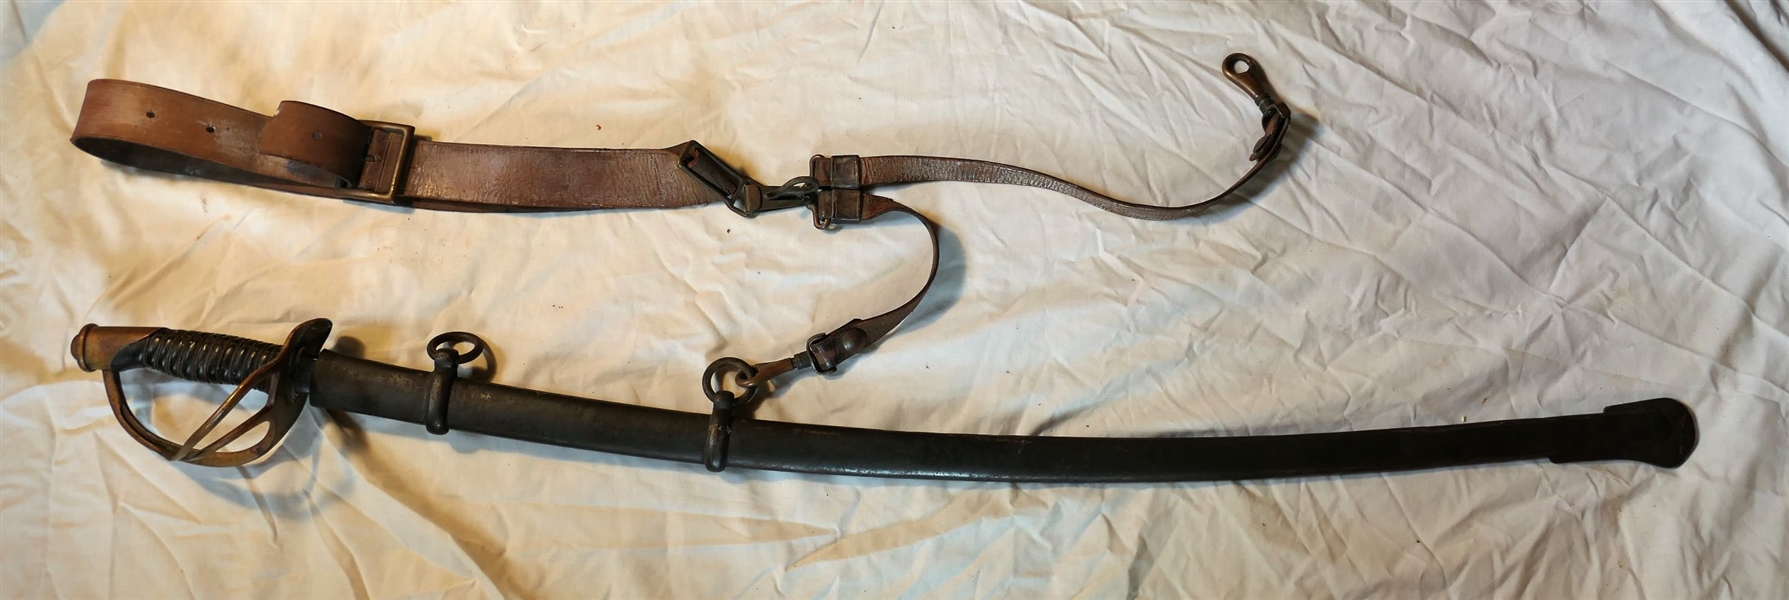 Mansfield & Lamb Forestdale US C.E.W. 1864 Civil War Sword in Metal Scabbard with Leather Strap - 